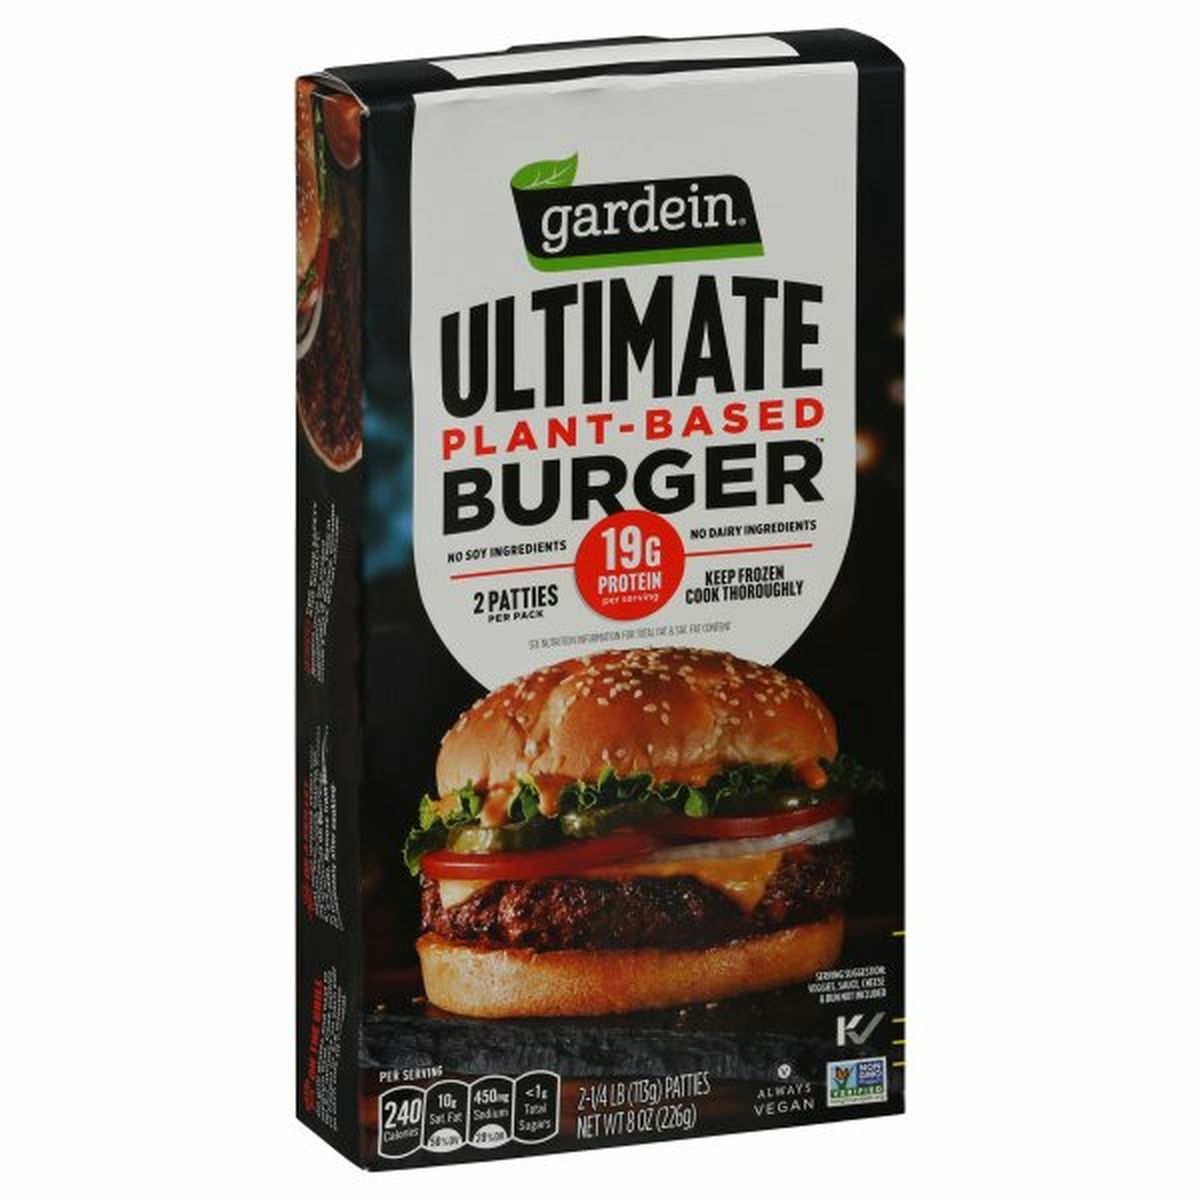 Calories in gardein Burger, Plant-Based, Ultimate